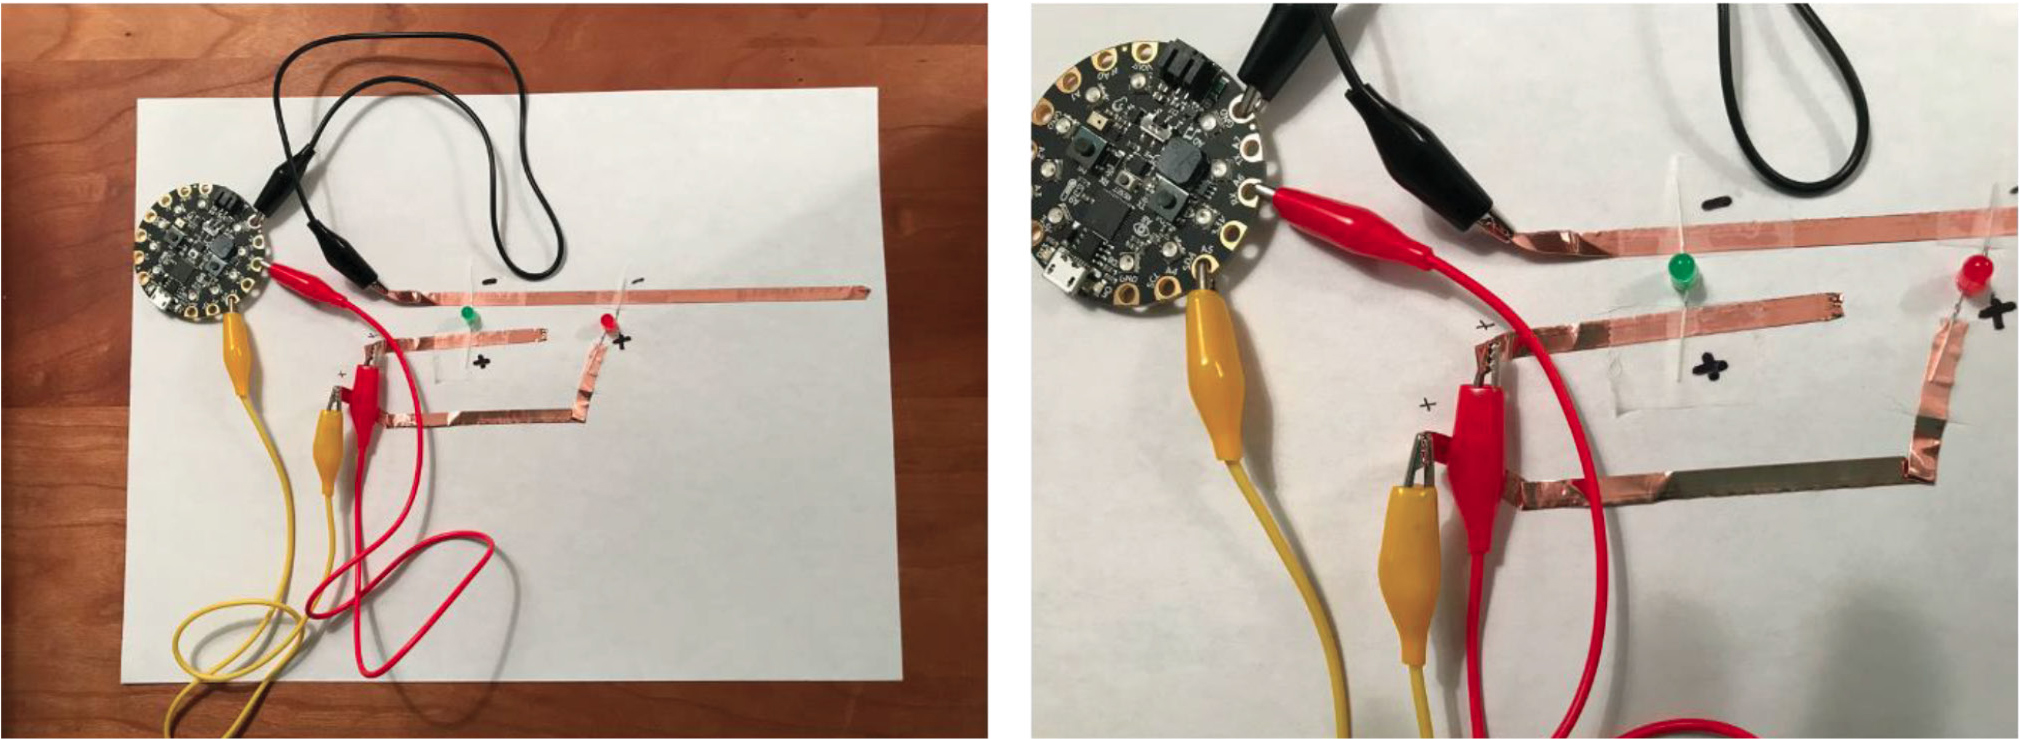 Left: one possible microcontroller that could be used for this project—the Circuit Playground Express by Adafruit. Right: lines of copper tape attached to the microcontroller using alligator clips.